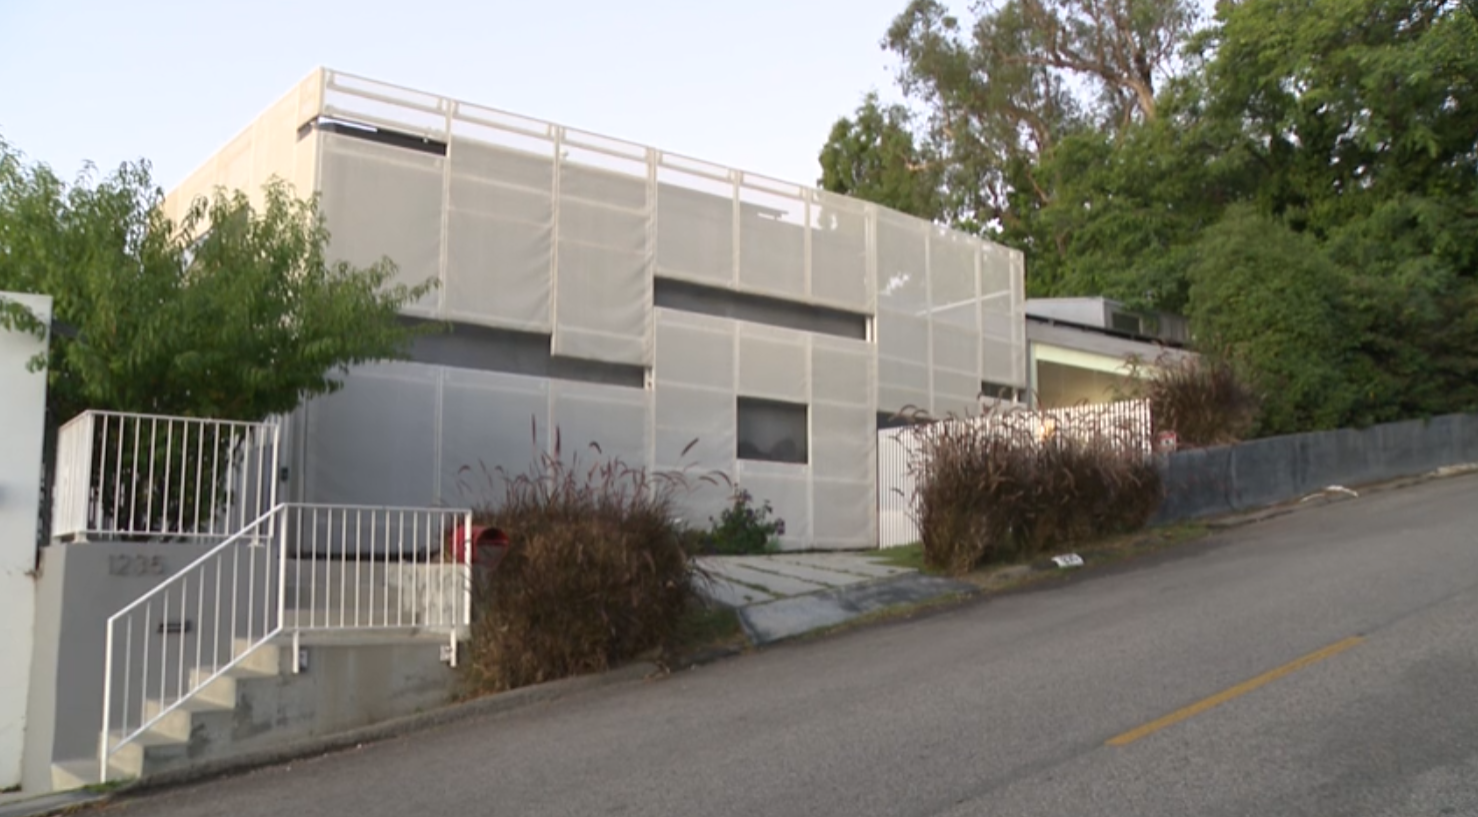 Brentwood home with Airbnb squatter